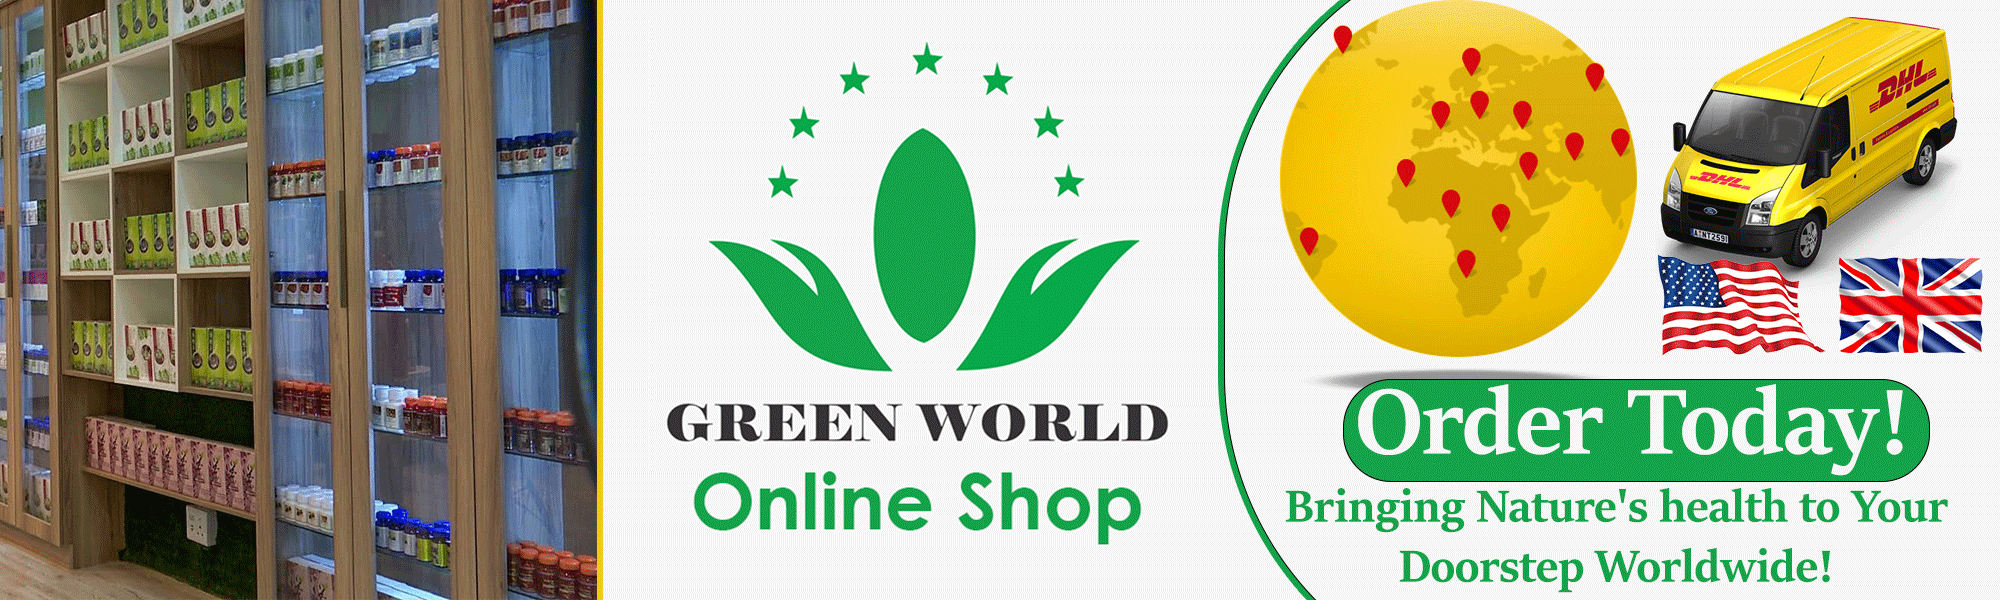 Green World Products DHL Shipping UK, USA and Europe